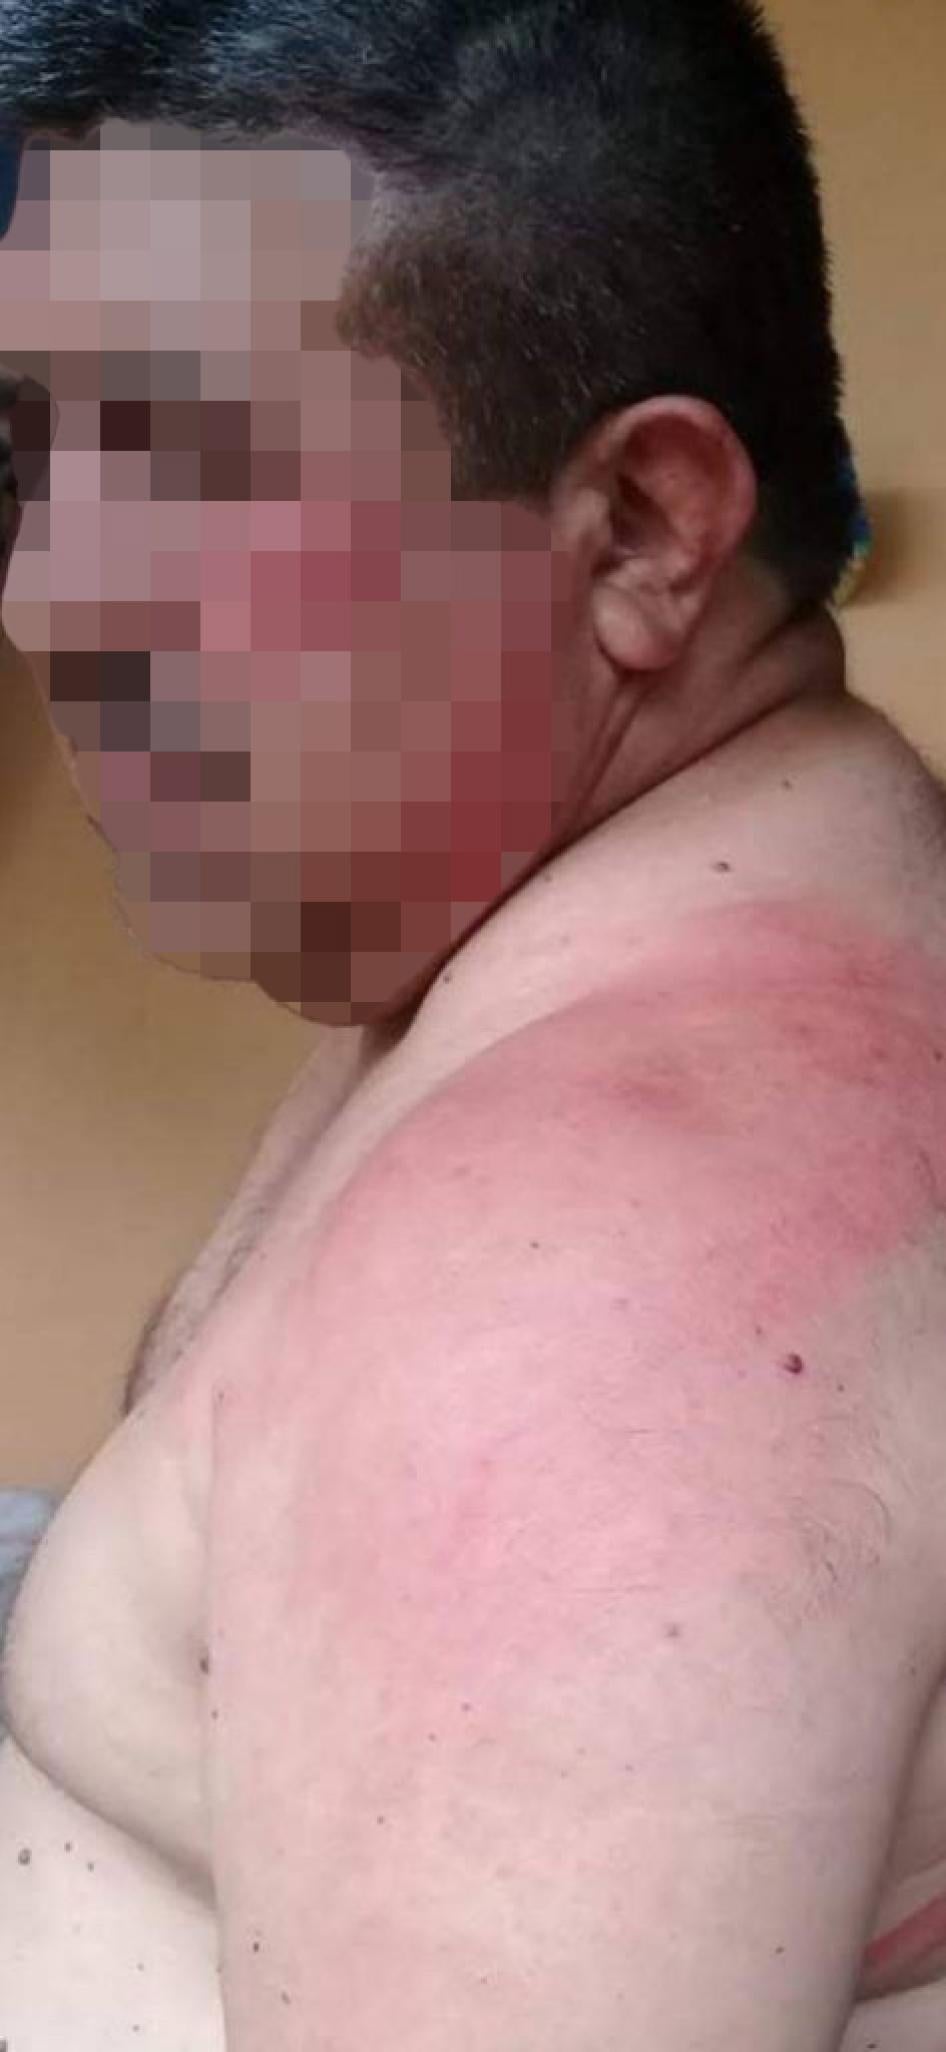 A pixelated photo of a man showing bruising on his body